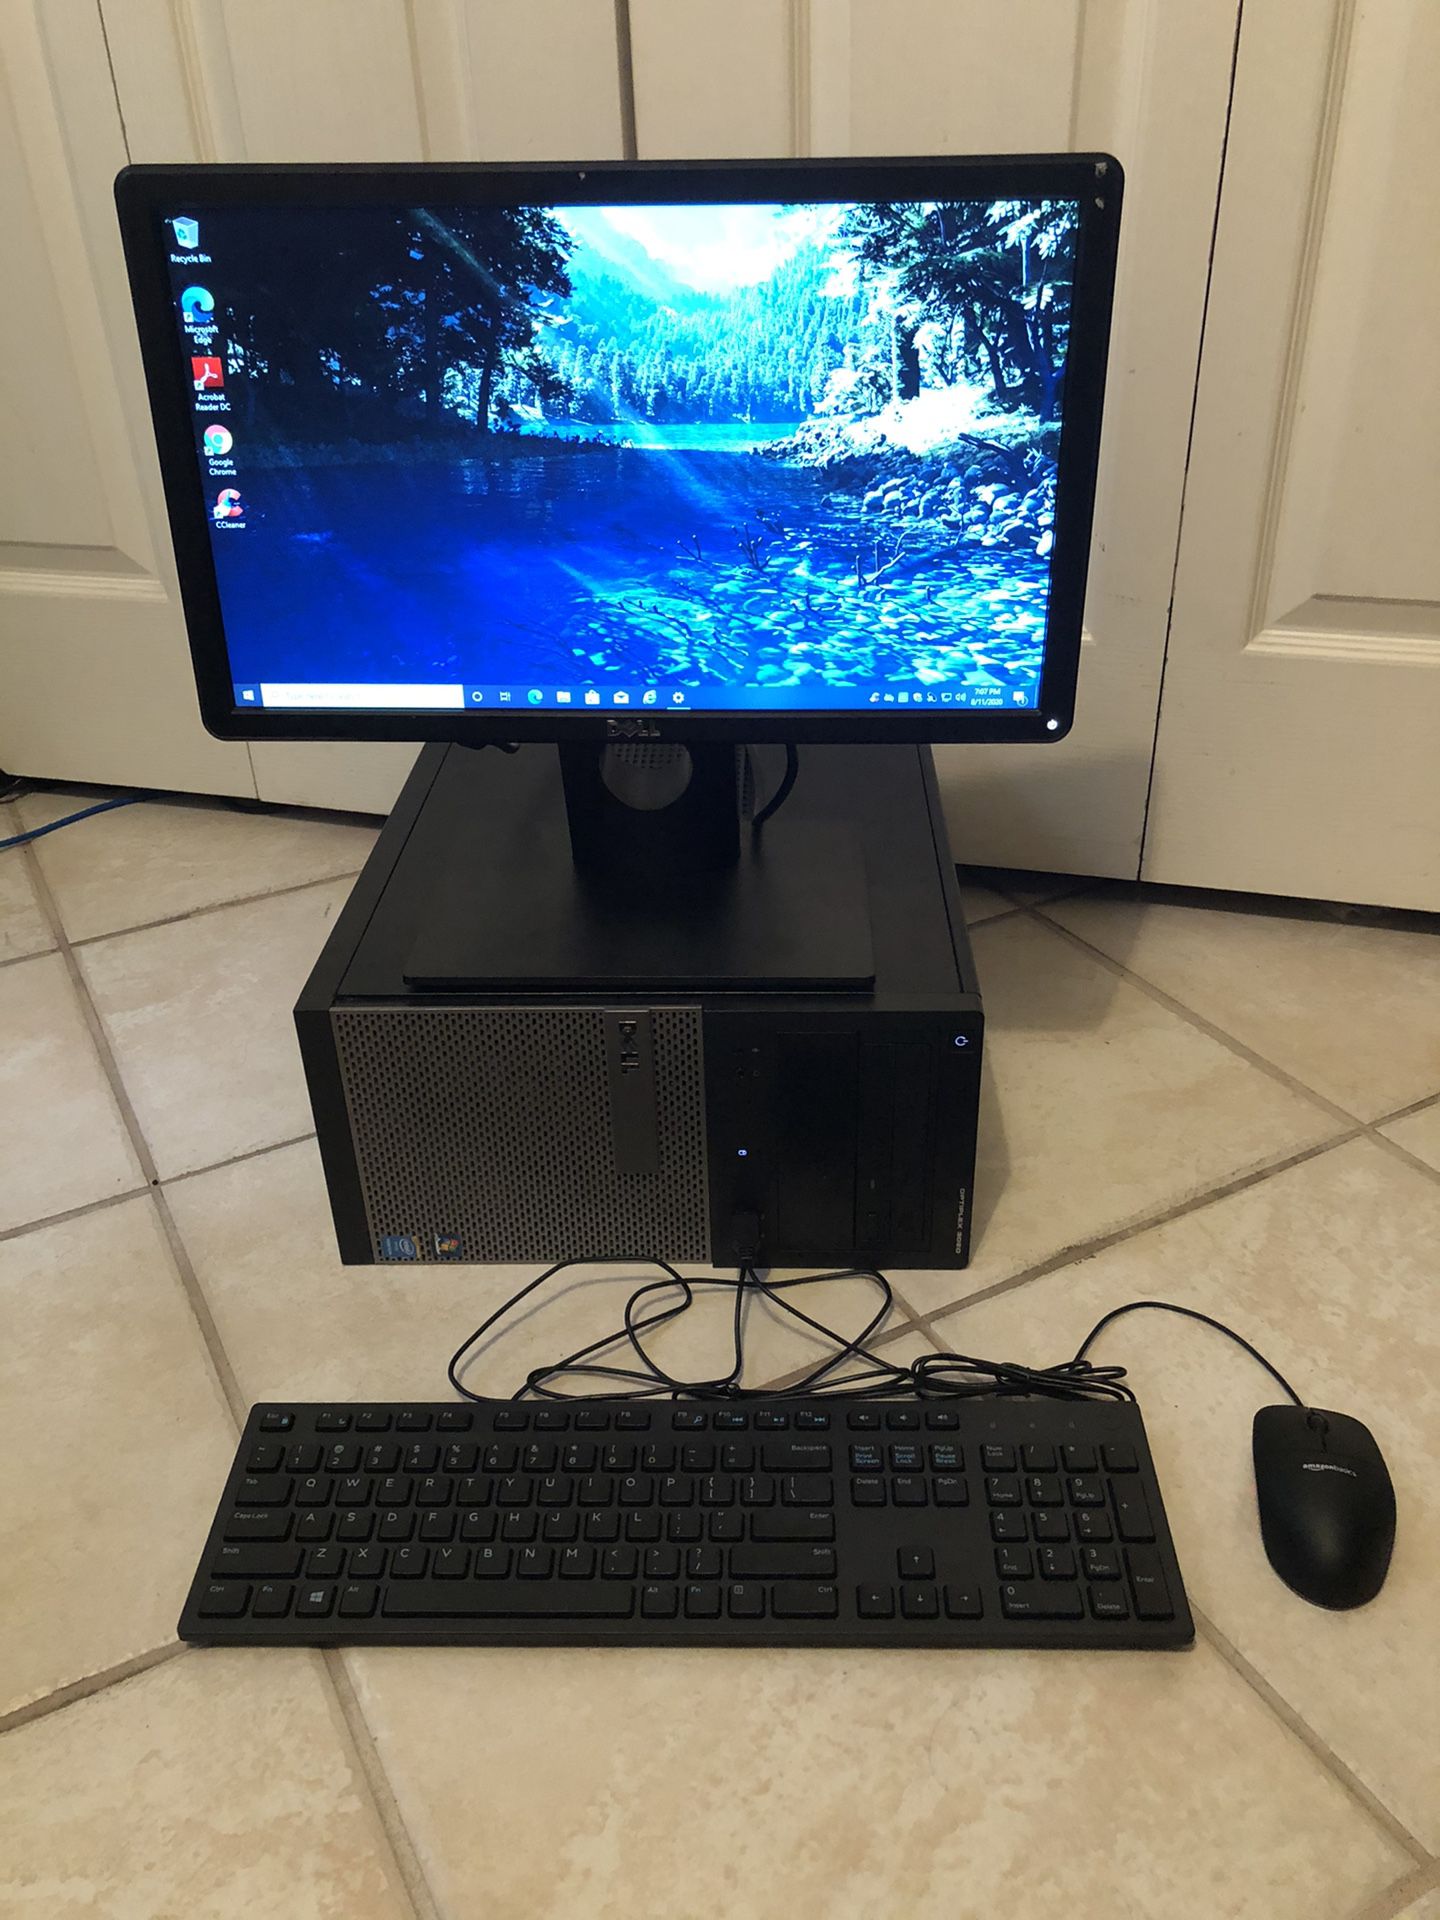 Dell desktop computer win10 pro - monitor - keyboard mouse Same os on tablets and tablets